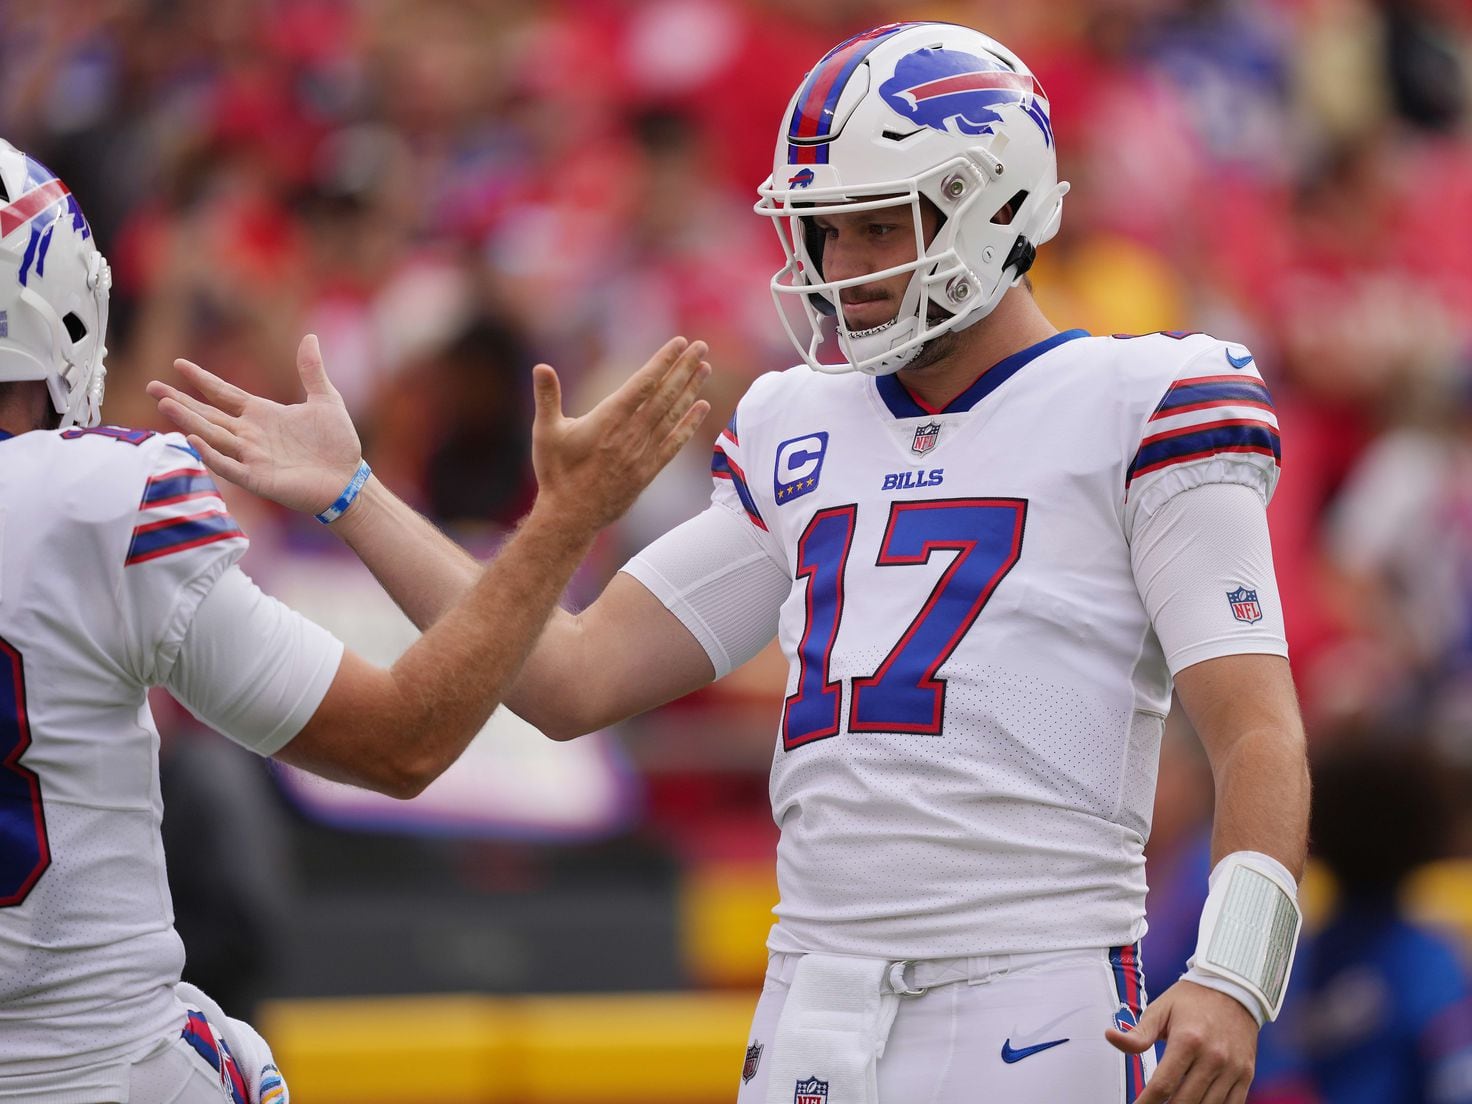 Buffalo Bills tied for highest over/under win total for 2022